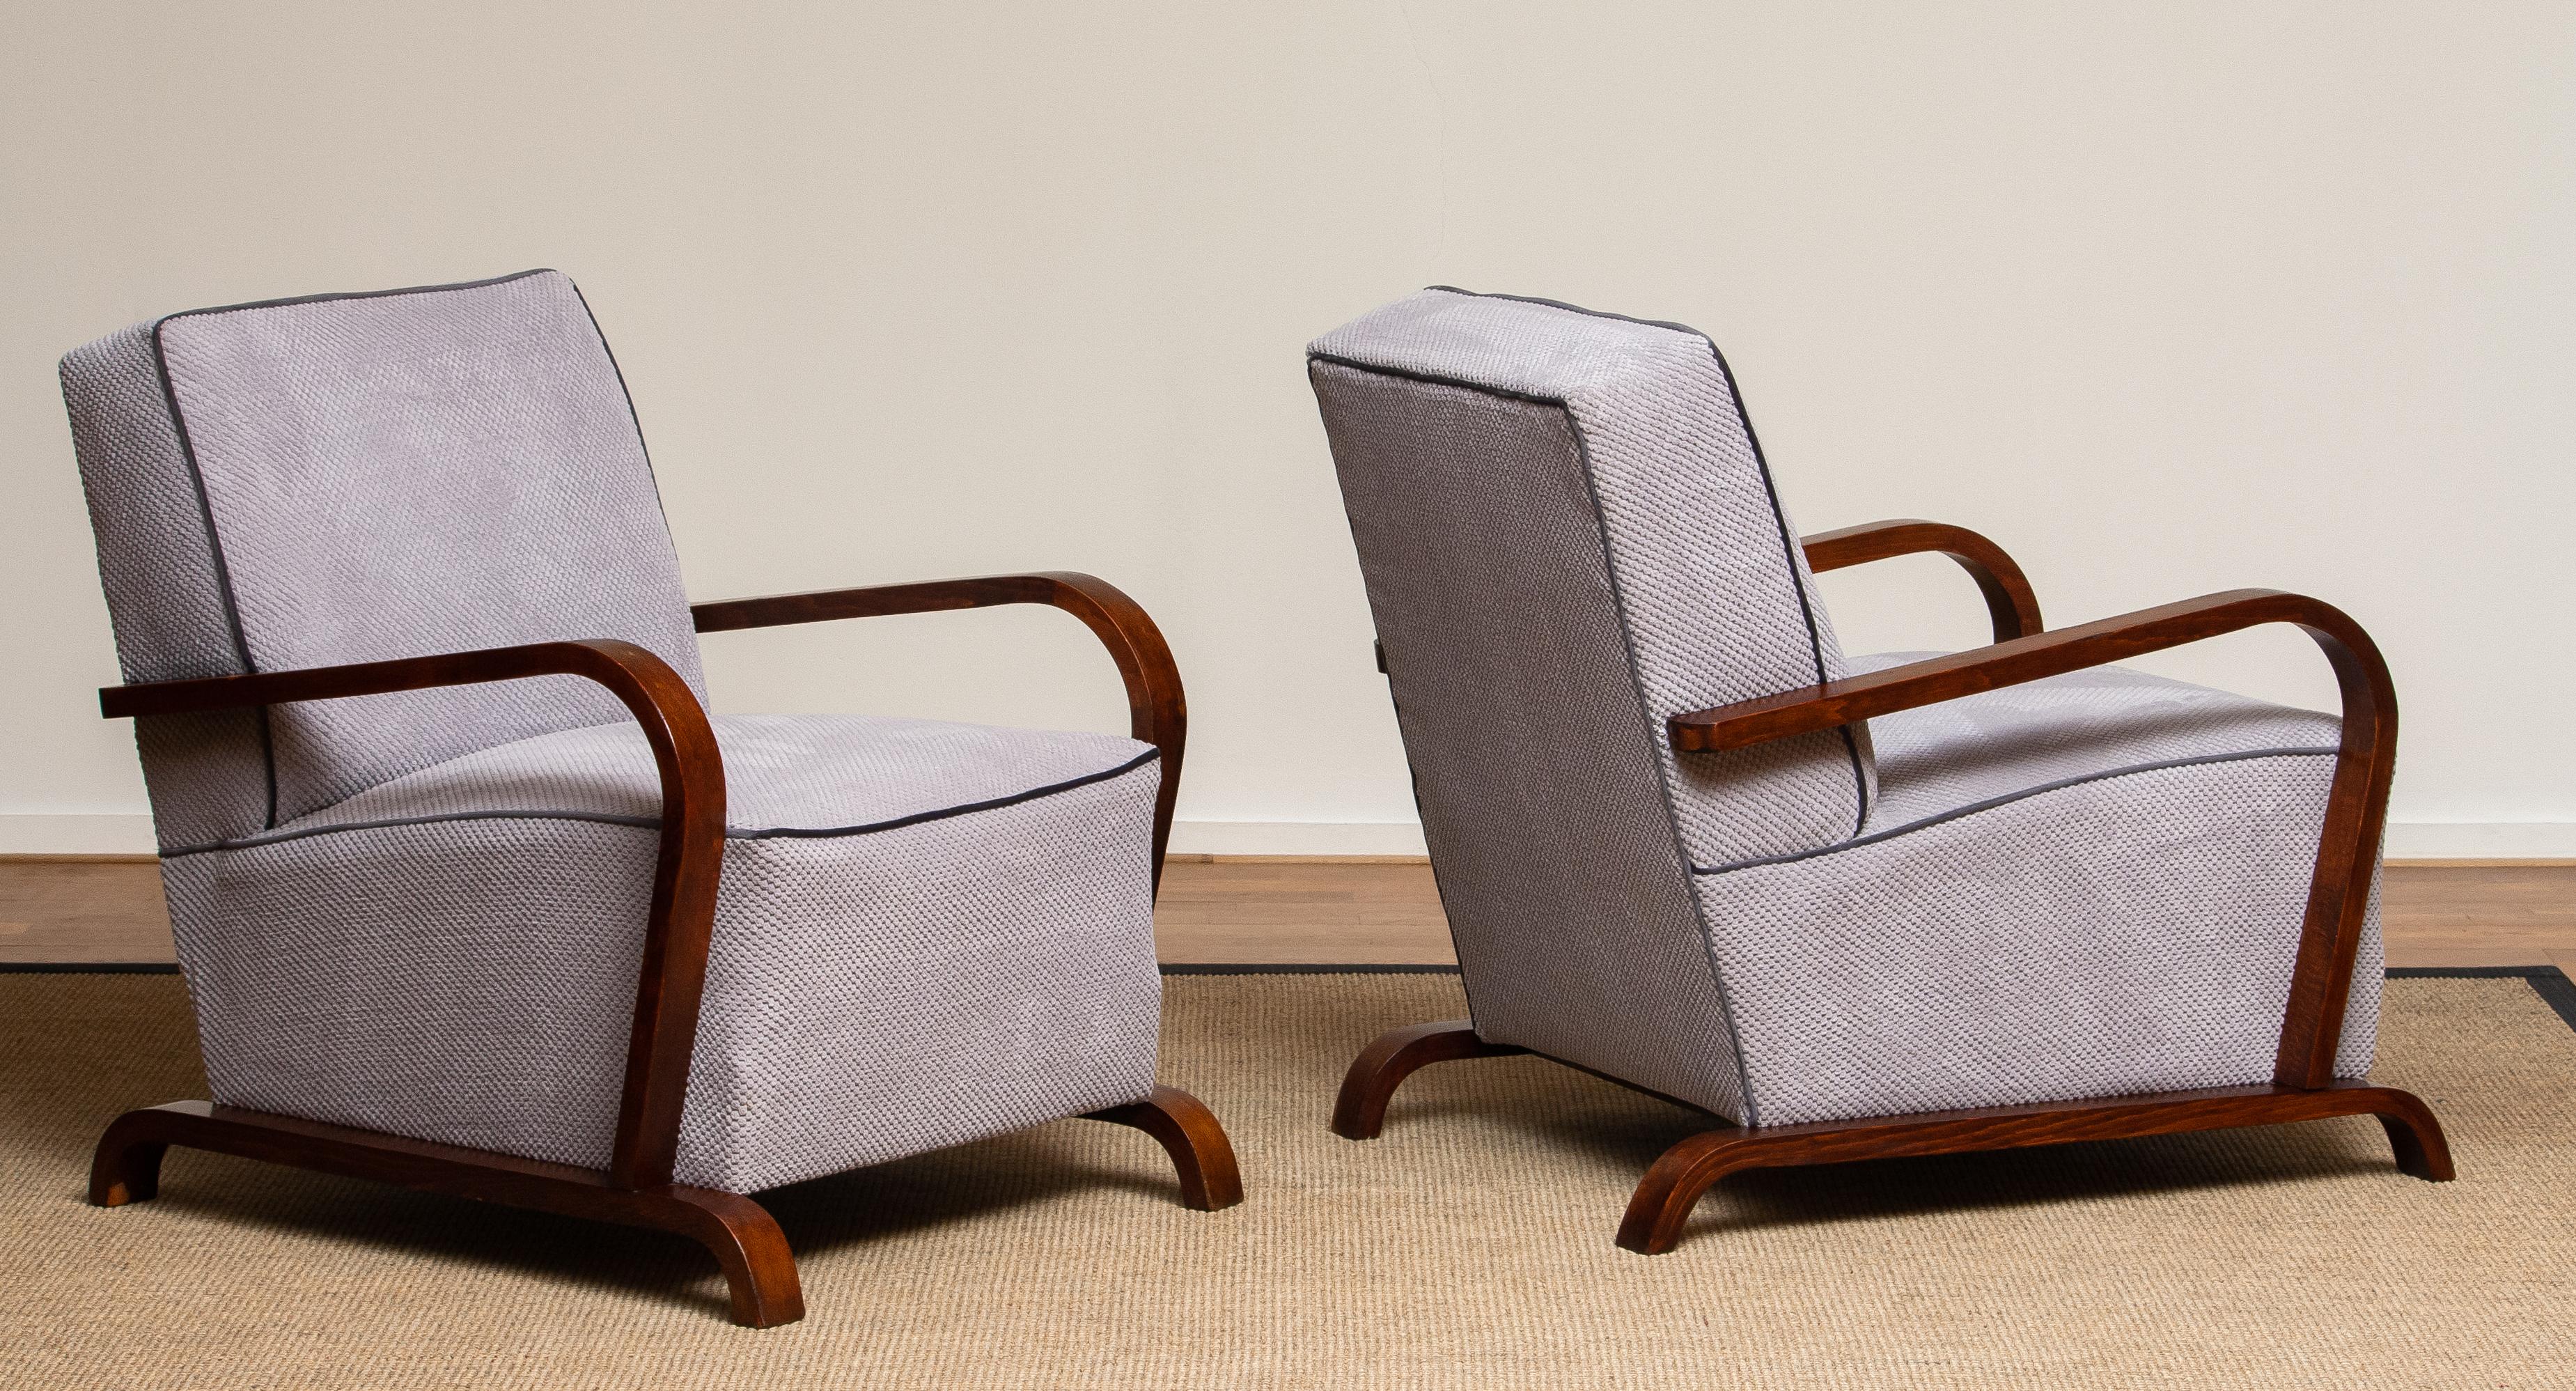 1920s, Pair of Scandinavian Art Deco Armchair / Lounge / Club Chairs from Sweden 2